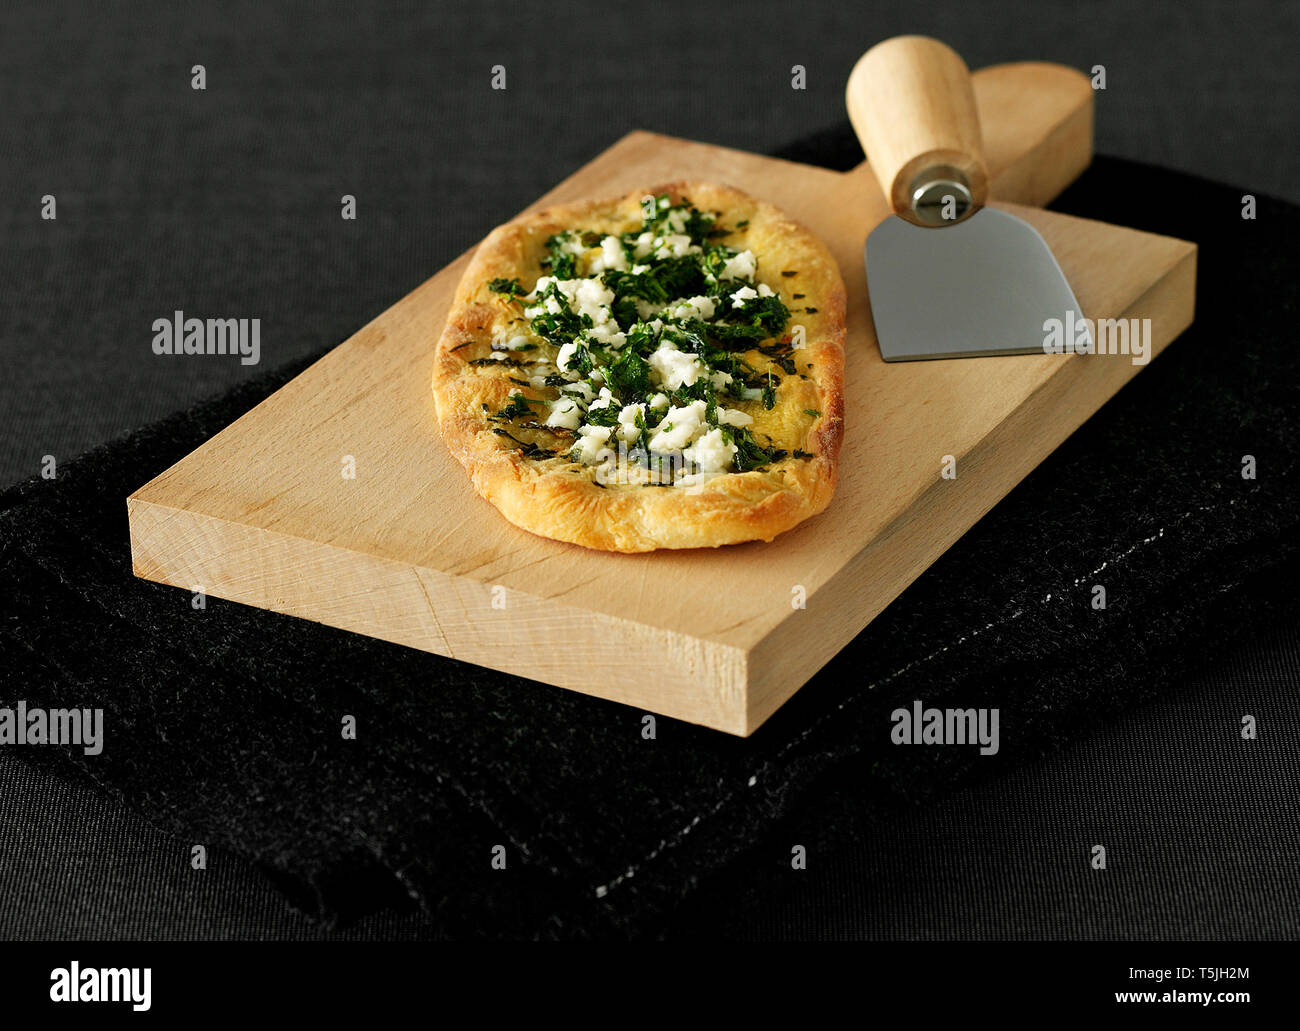 Cheese and spinach pizza Stock Photo